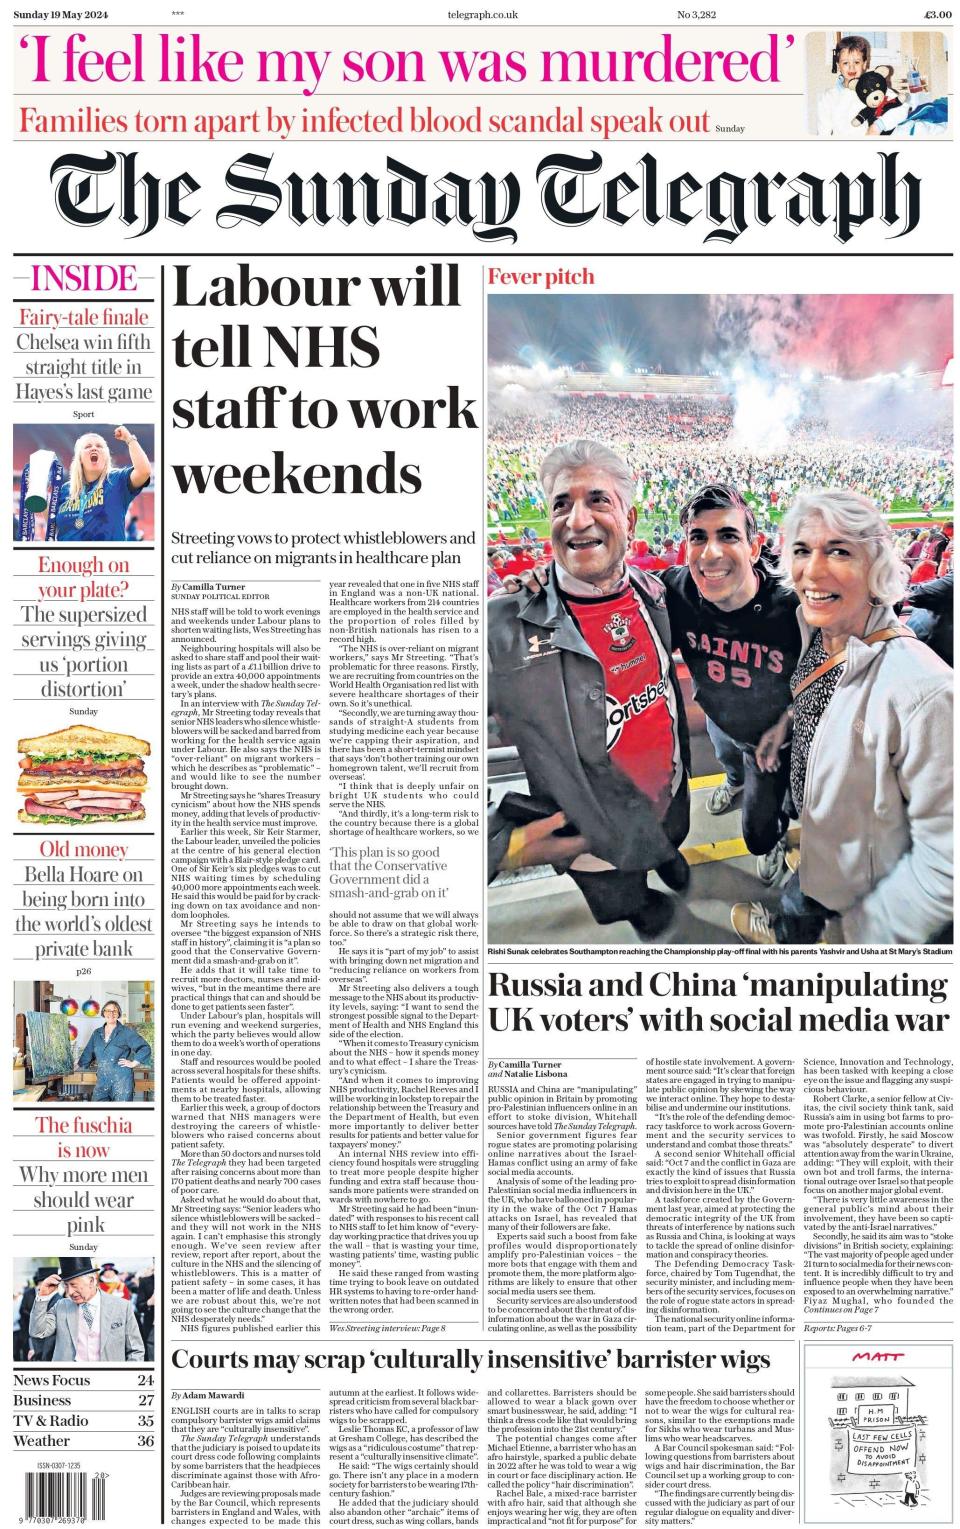 Sunday Telegraph: Labour tell NHS staff to work weekends